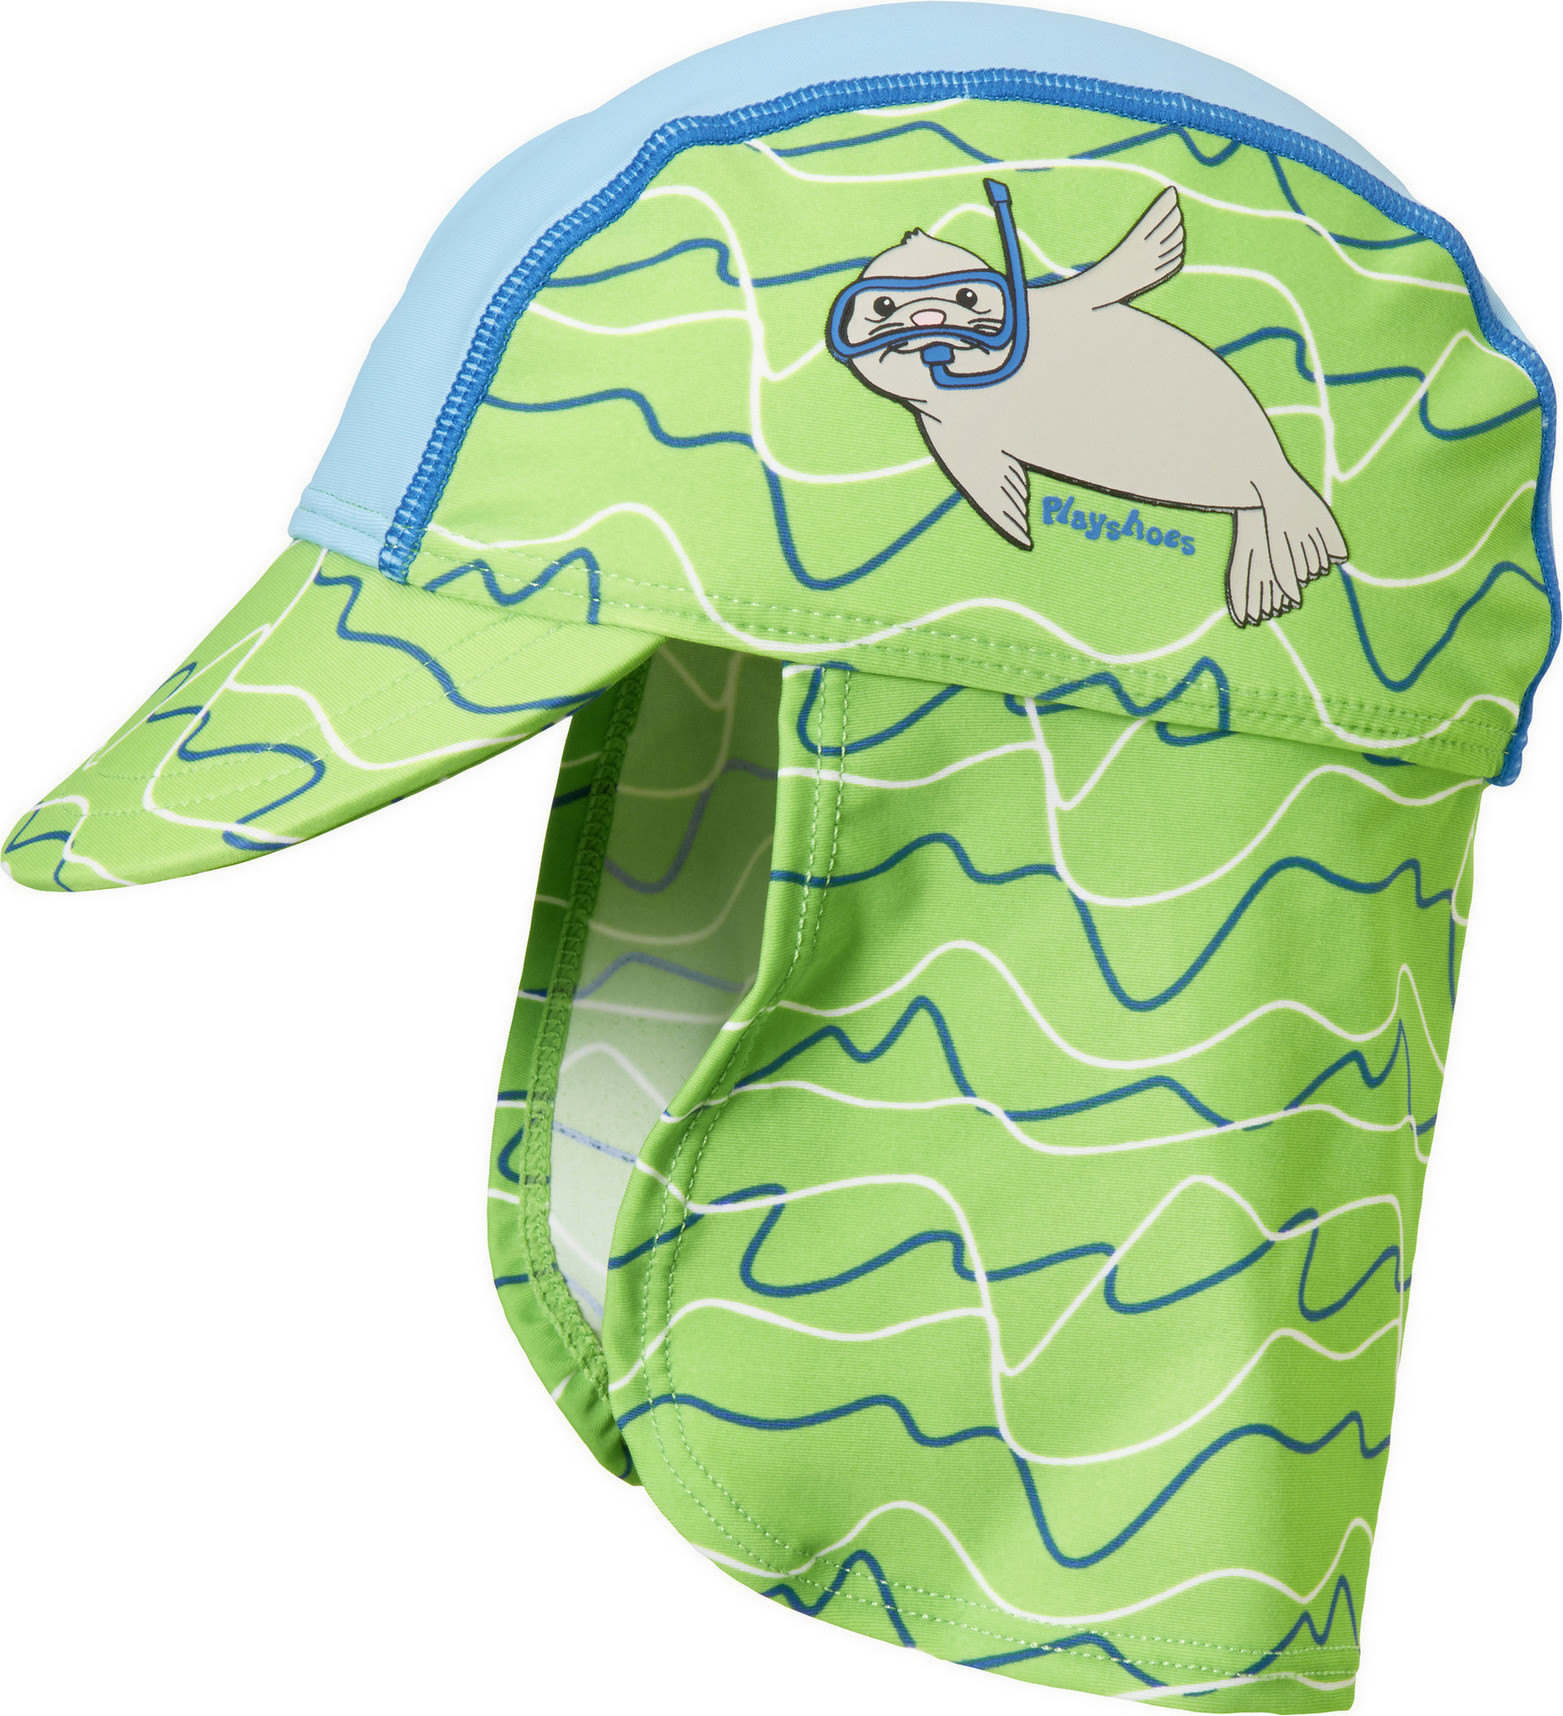 Playshoes - UV sun cap with neck flap for kids - seal - blue/green 